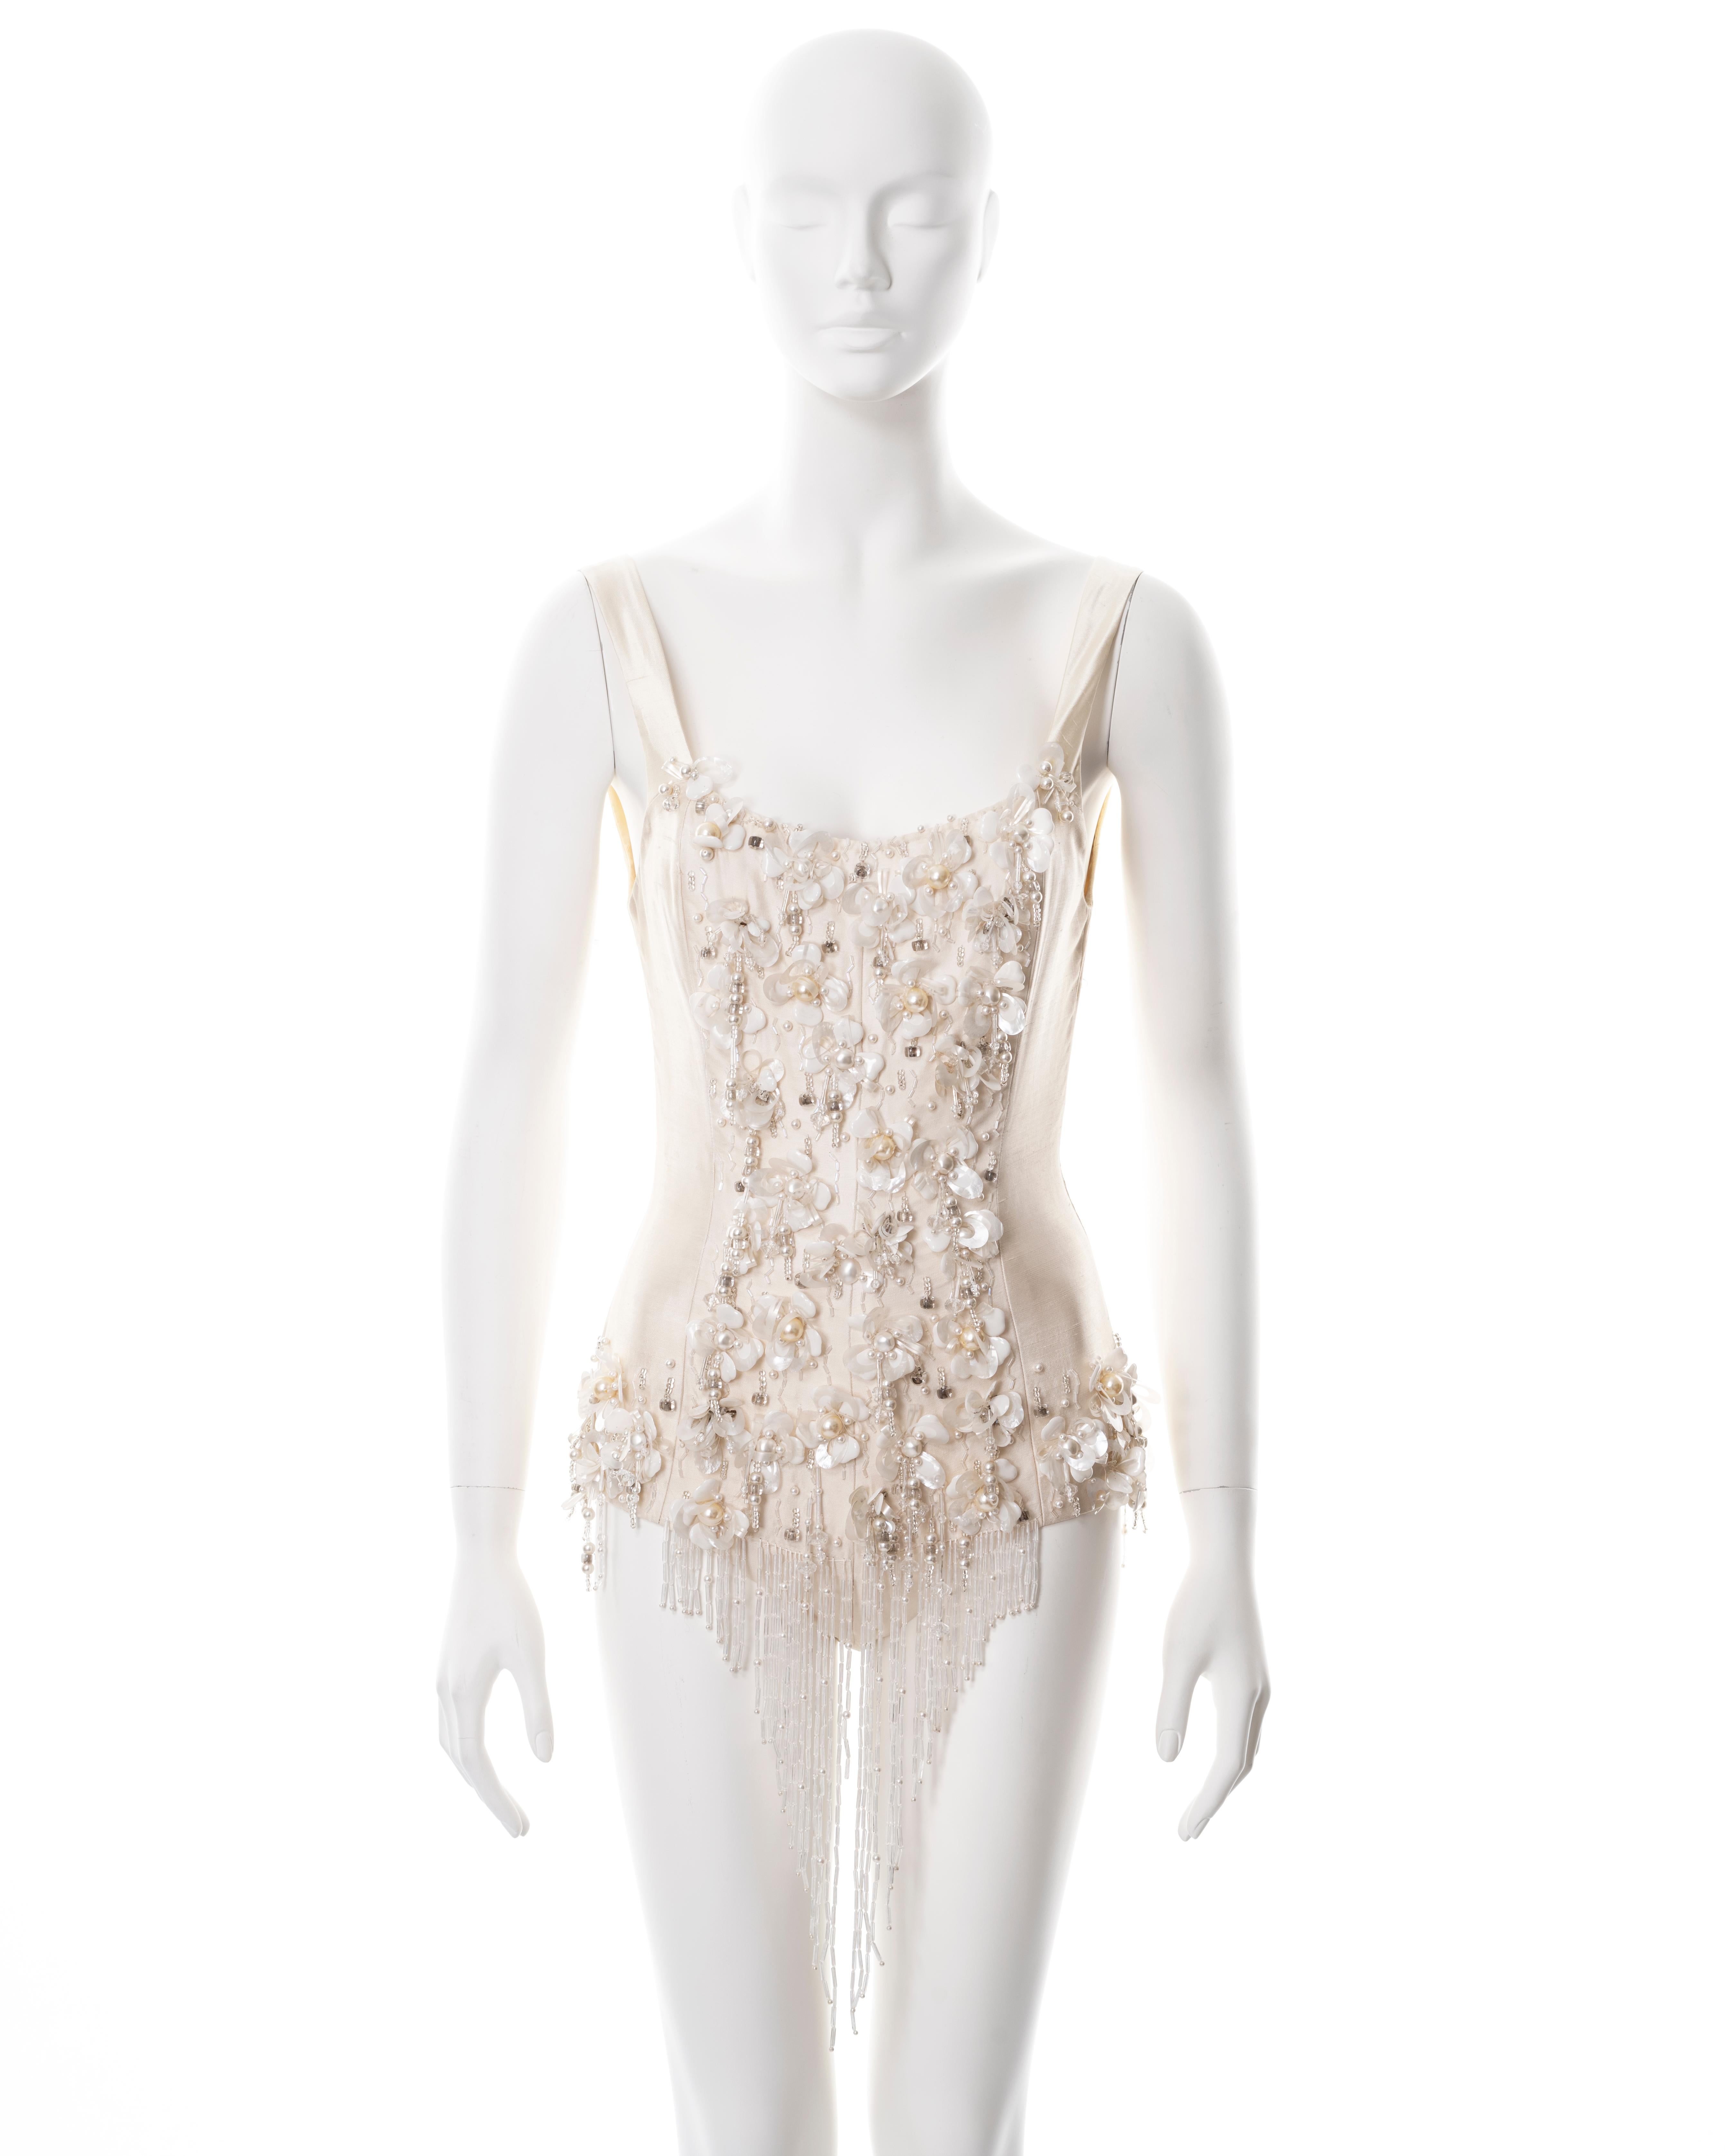 ▪ Chloé showpiece bodysuit
▪ Designed by Martine Sitbon
▪ Sold by One of a Kind Archive
▪ Spring-Summer 1991
▪ Constructed from ivory raw silk 
▪ Floral embellishments of petal-shape paillettes, faux pearls, bugle and clear beads
▪ Size approx. FR